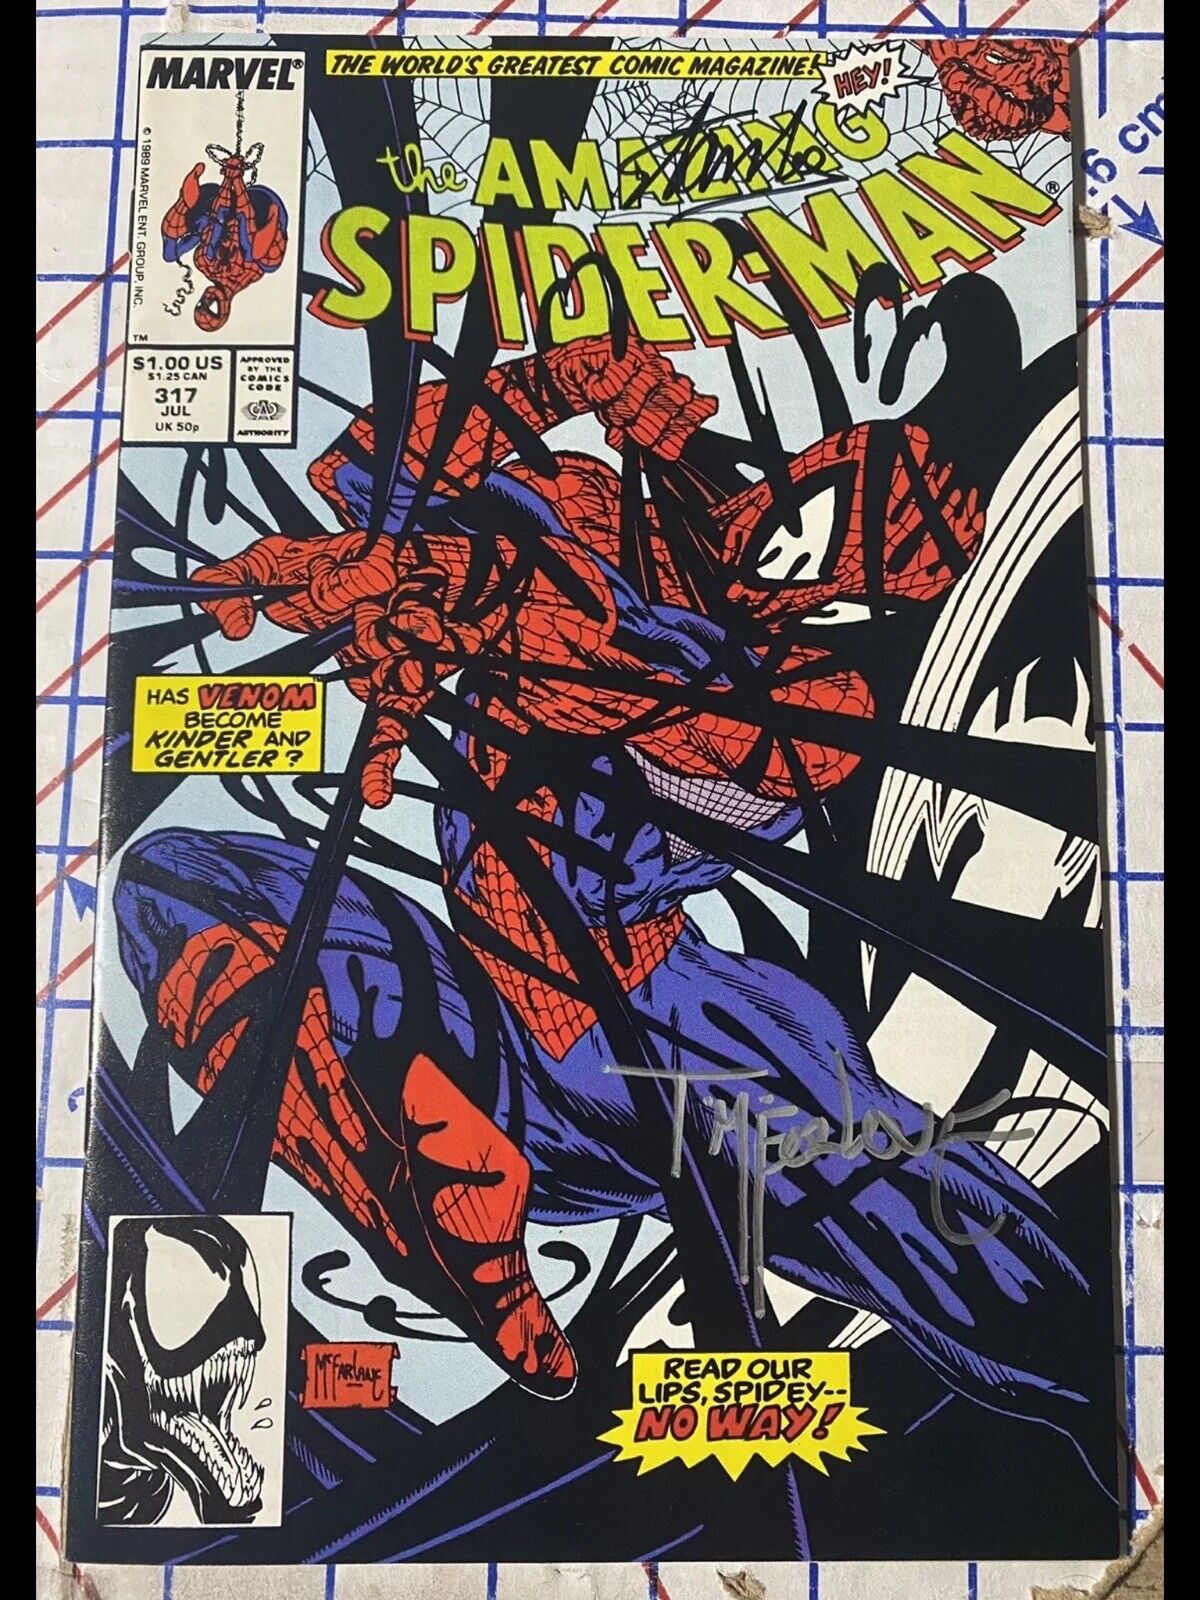 1989 AMAZING SPIDER-MAN #317 VENOM SIGNED BY STAN LEE AND TODD MCFARLANE